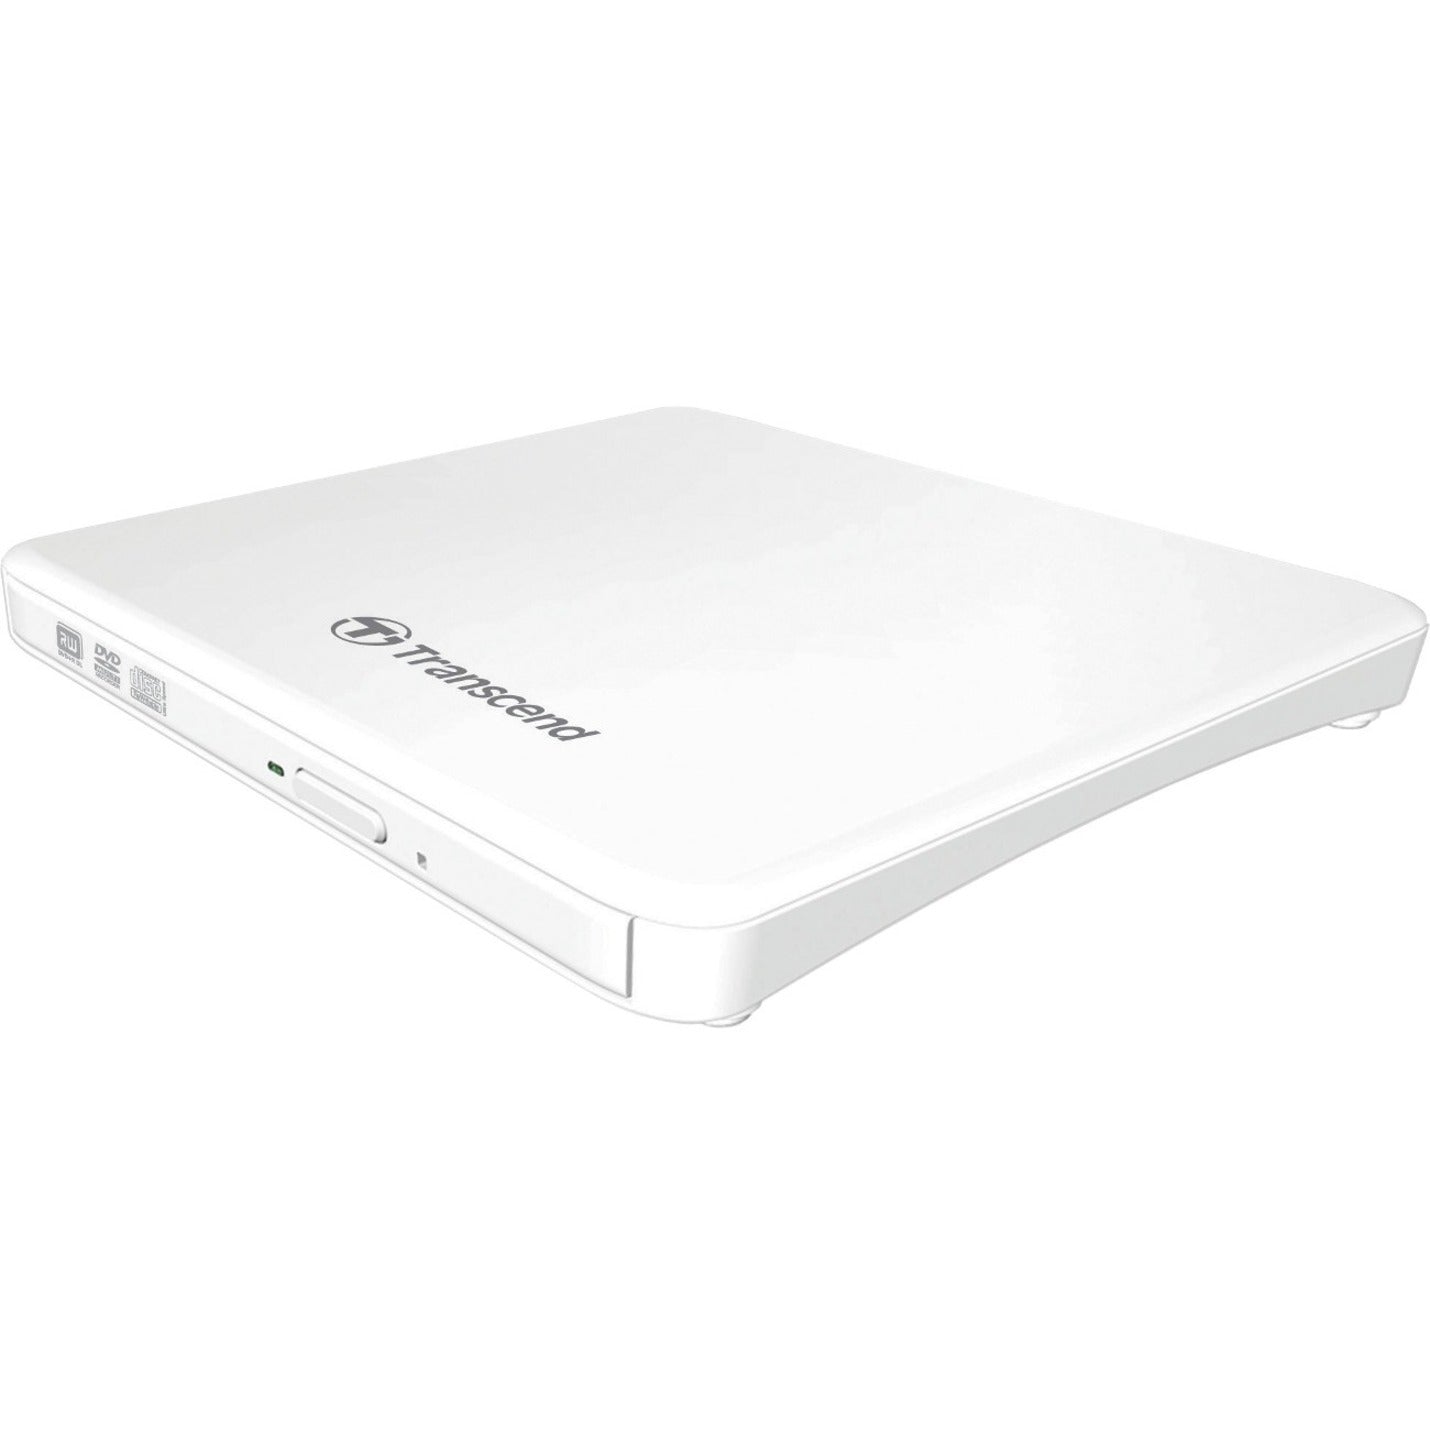 Transcend TS8XDVDS-W Extra Slim Portable DVD Writer, USB 2.0, 2 Year Limited Warranty